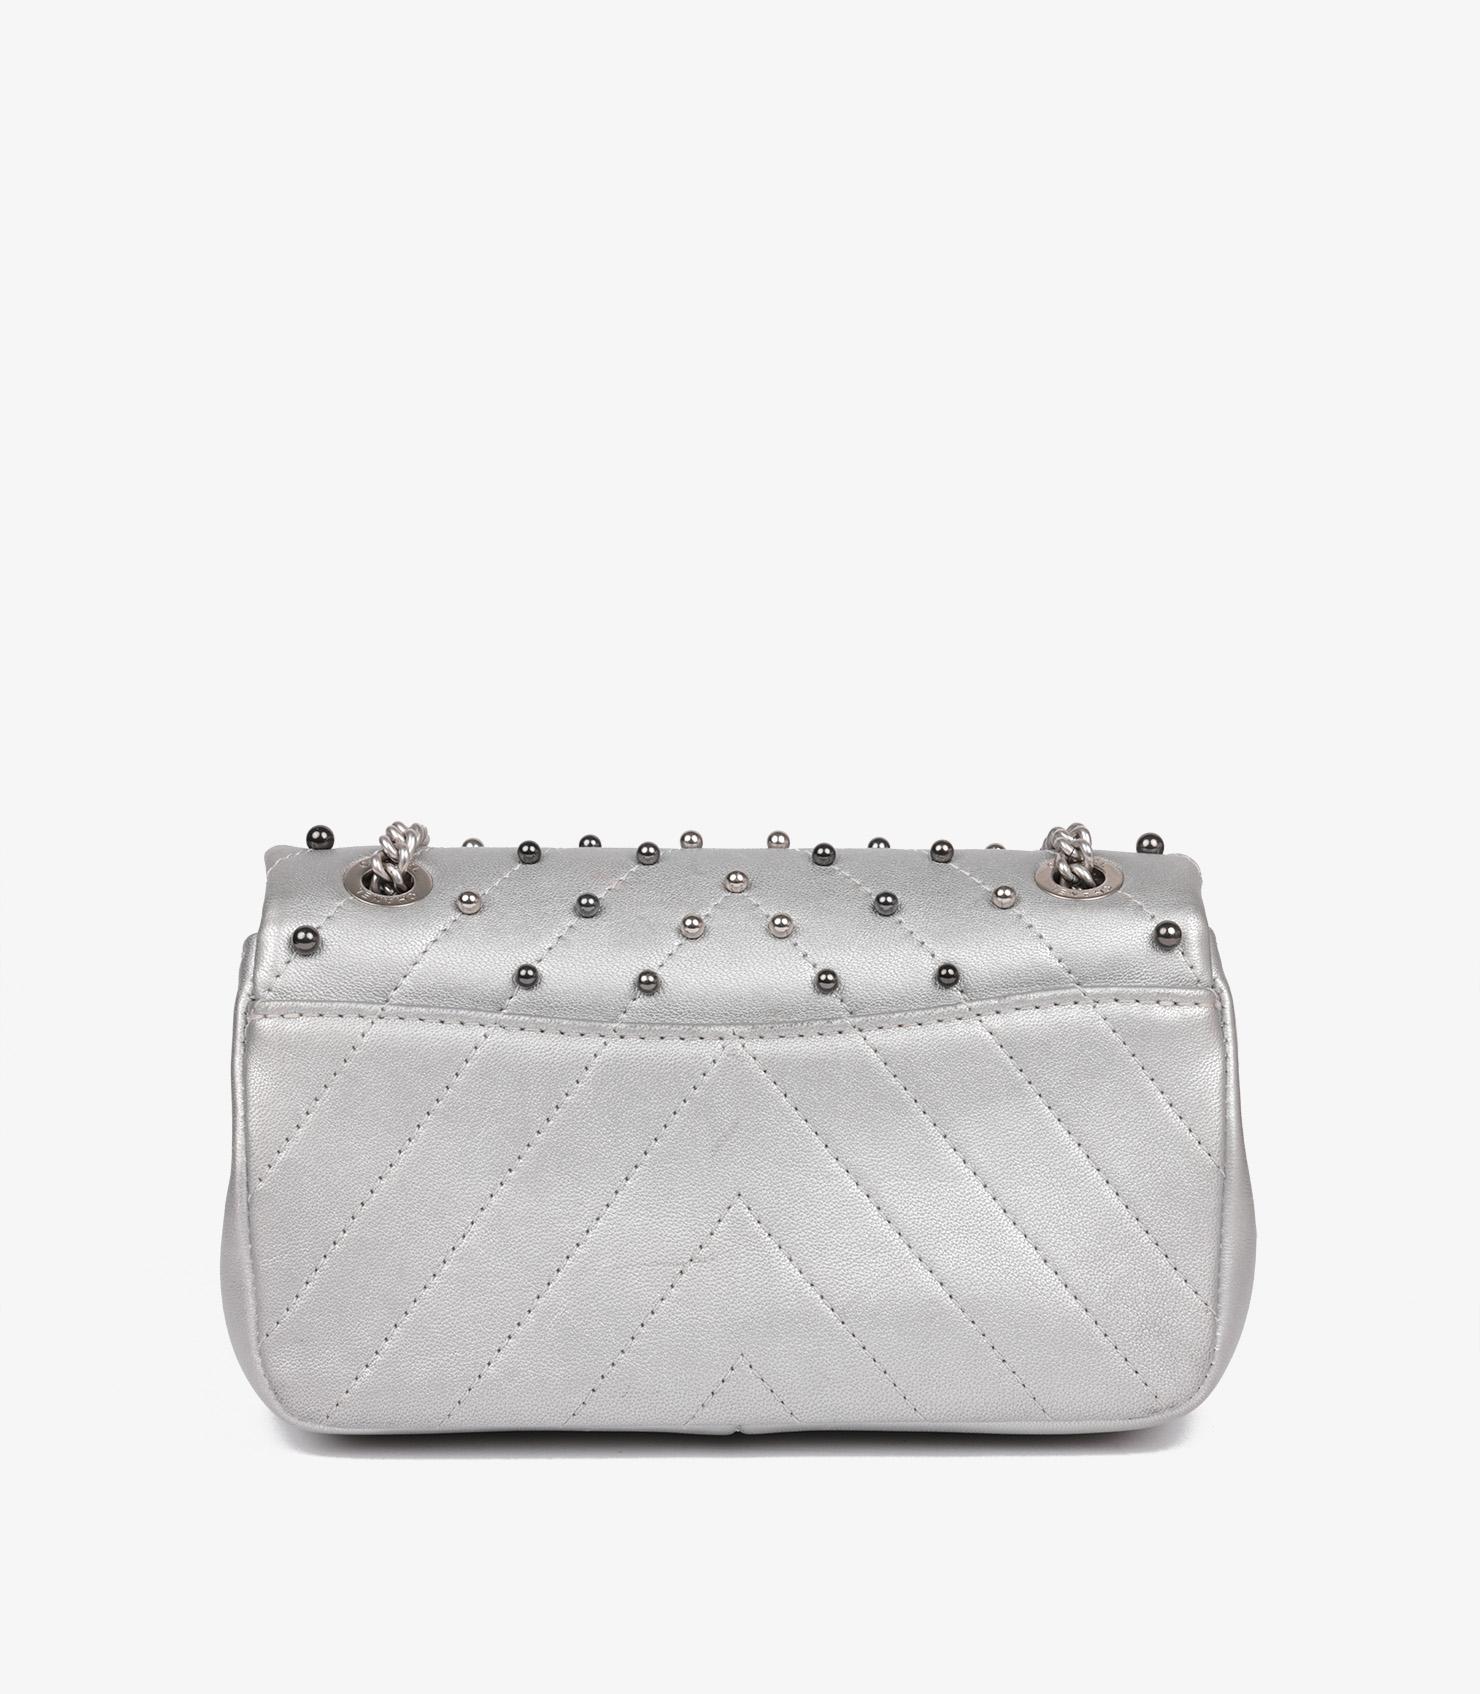 Chanel Silver Chevron Quilted Lambskin Stud Wars Rectangular Mini Flap Bag For Sale 2